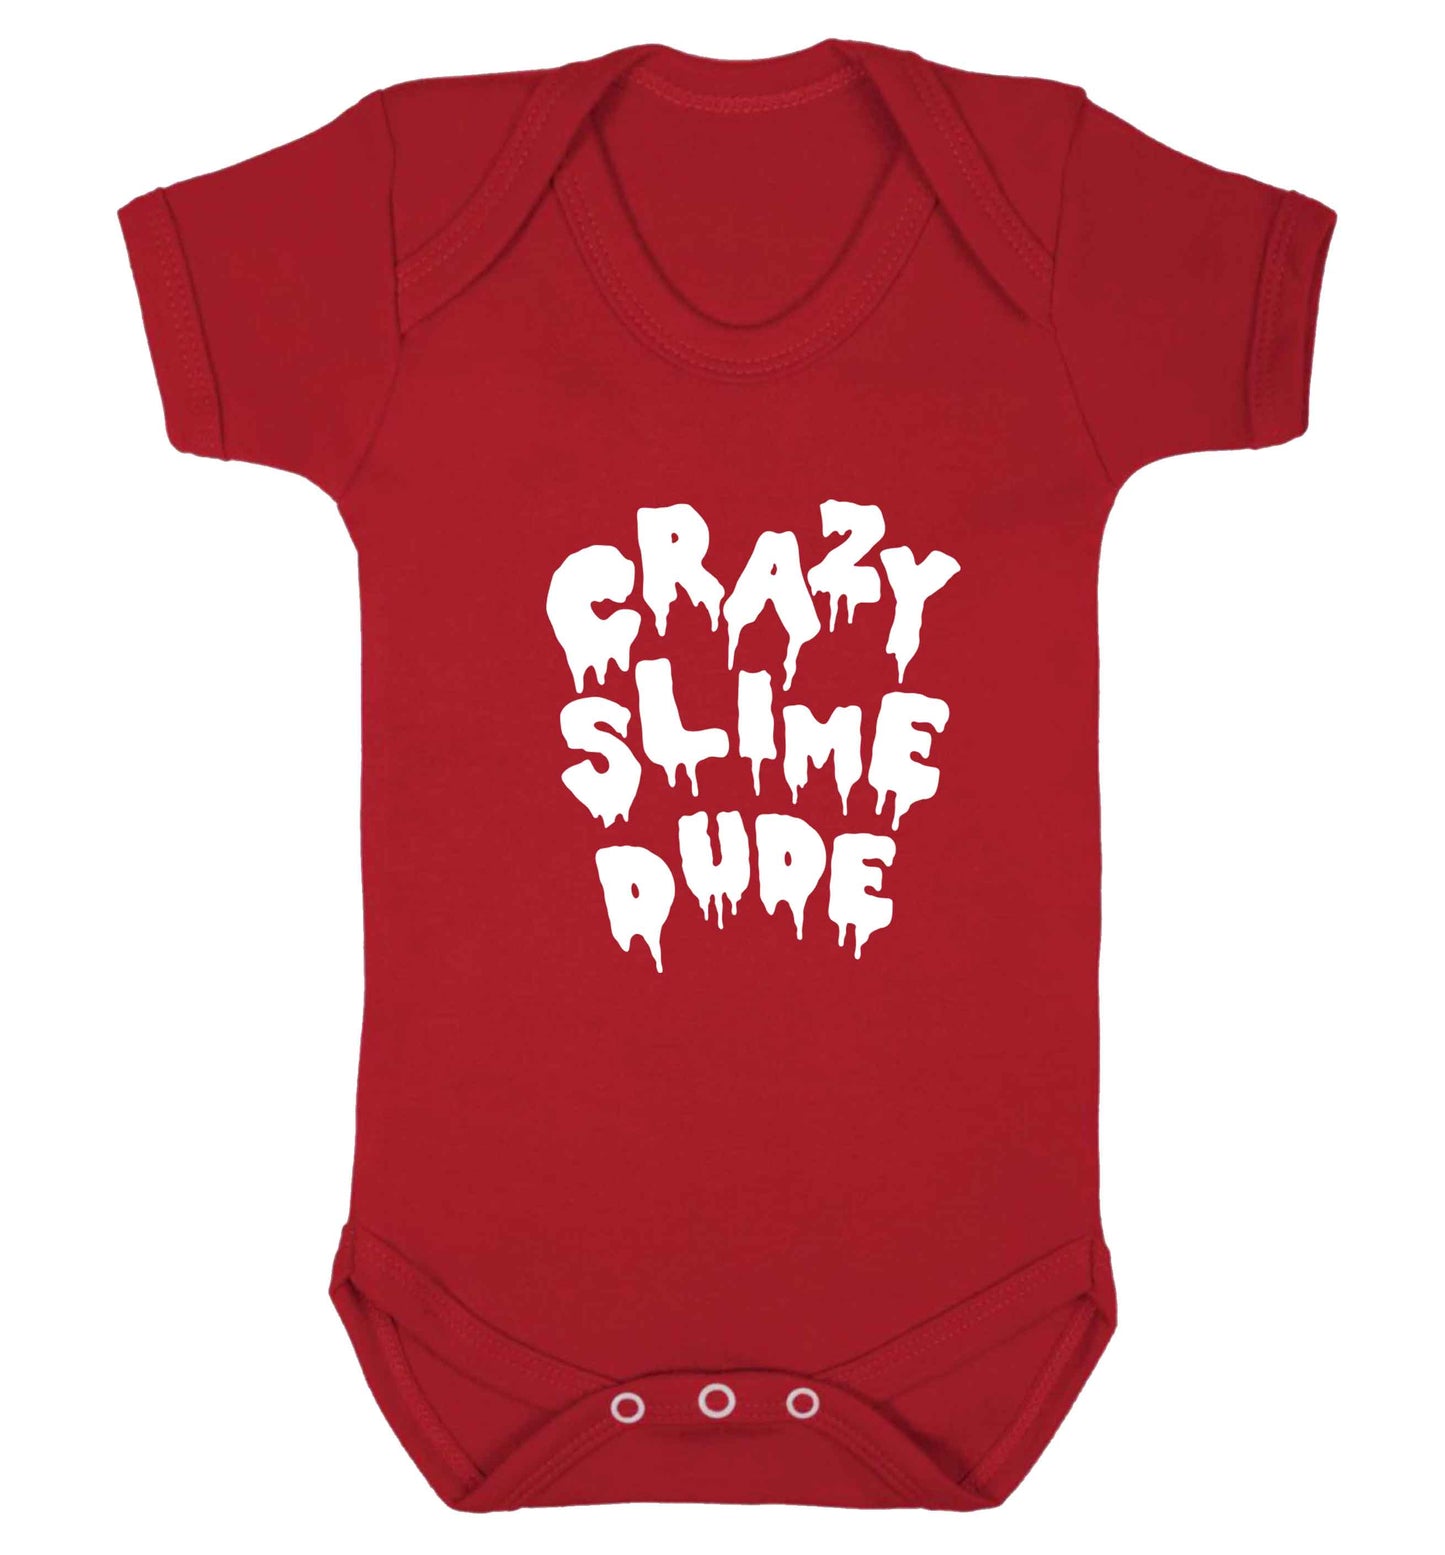 Crazy slime dude baby vest red 18-24 months